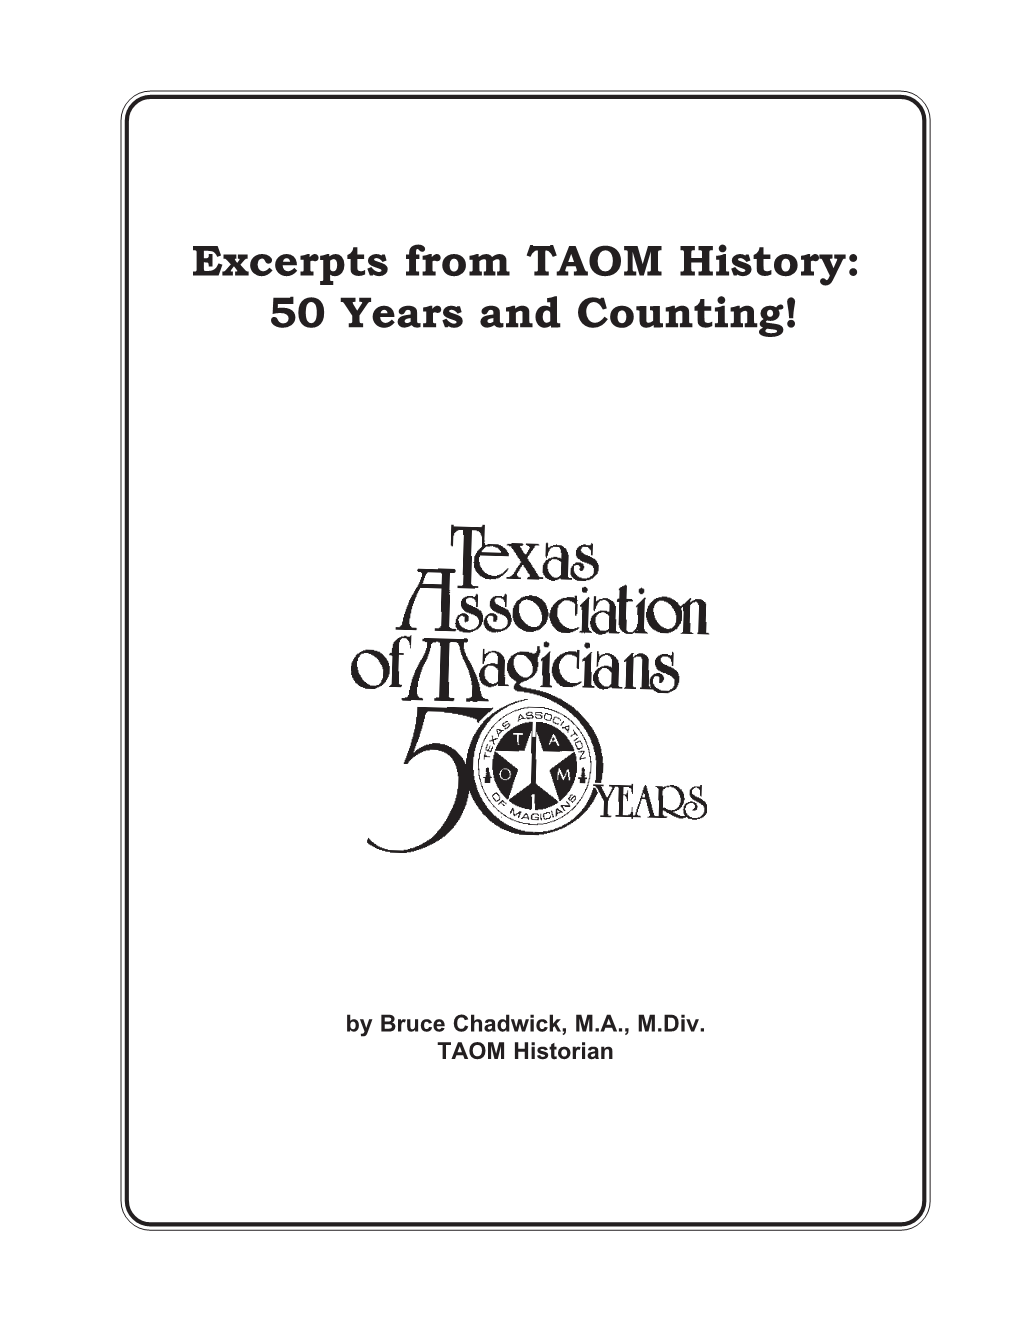 Excerpts from TAOM History: 50 Years and Counting!